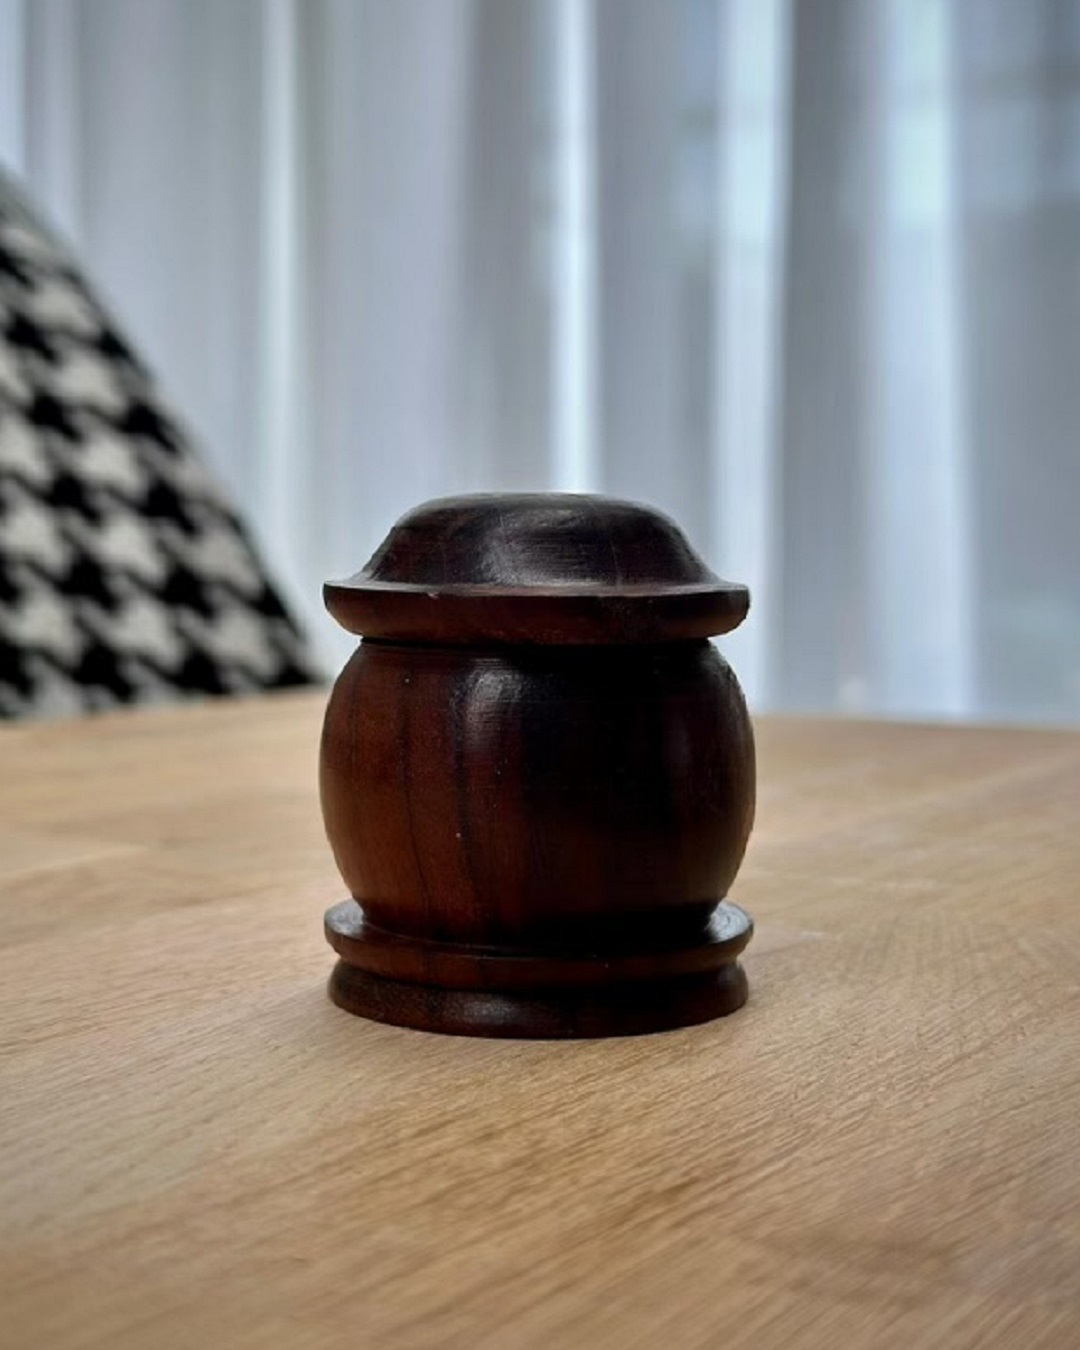 Wooden container hand woven on table